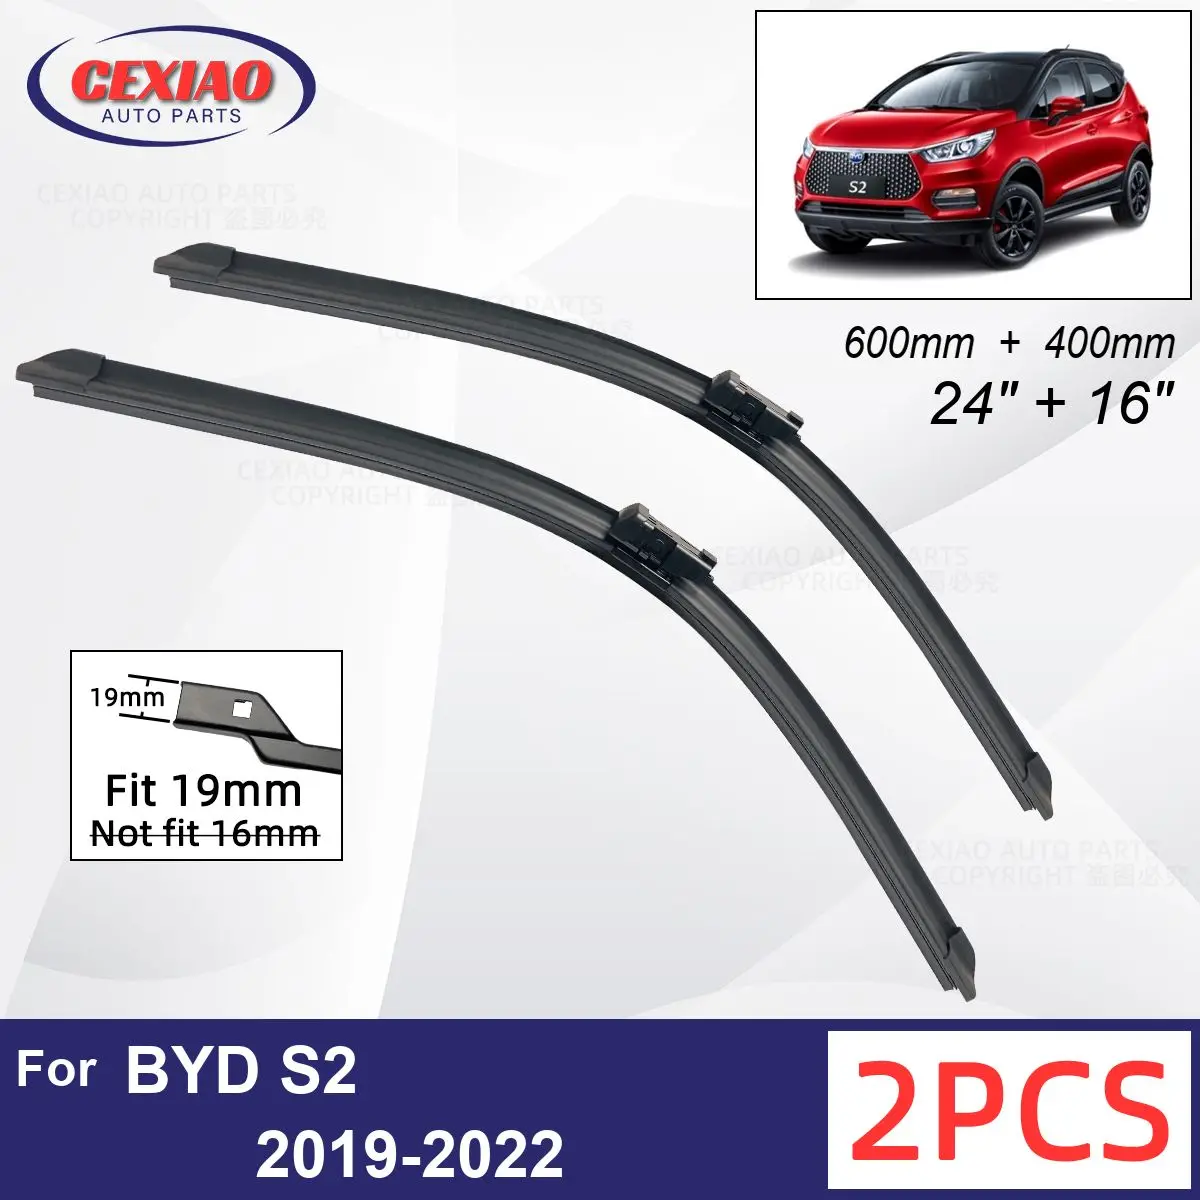 

Car Wiper For BYD S2 2019-2022 Front Wiper Blades Soft Rubber Windscreen Wipers Auto Windshield 24"+16" 600mm + 400mm